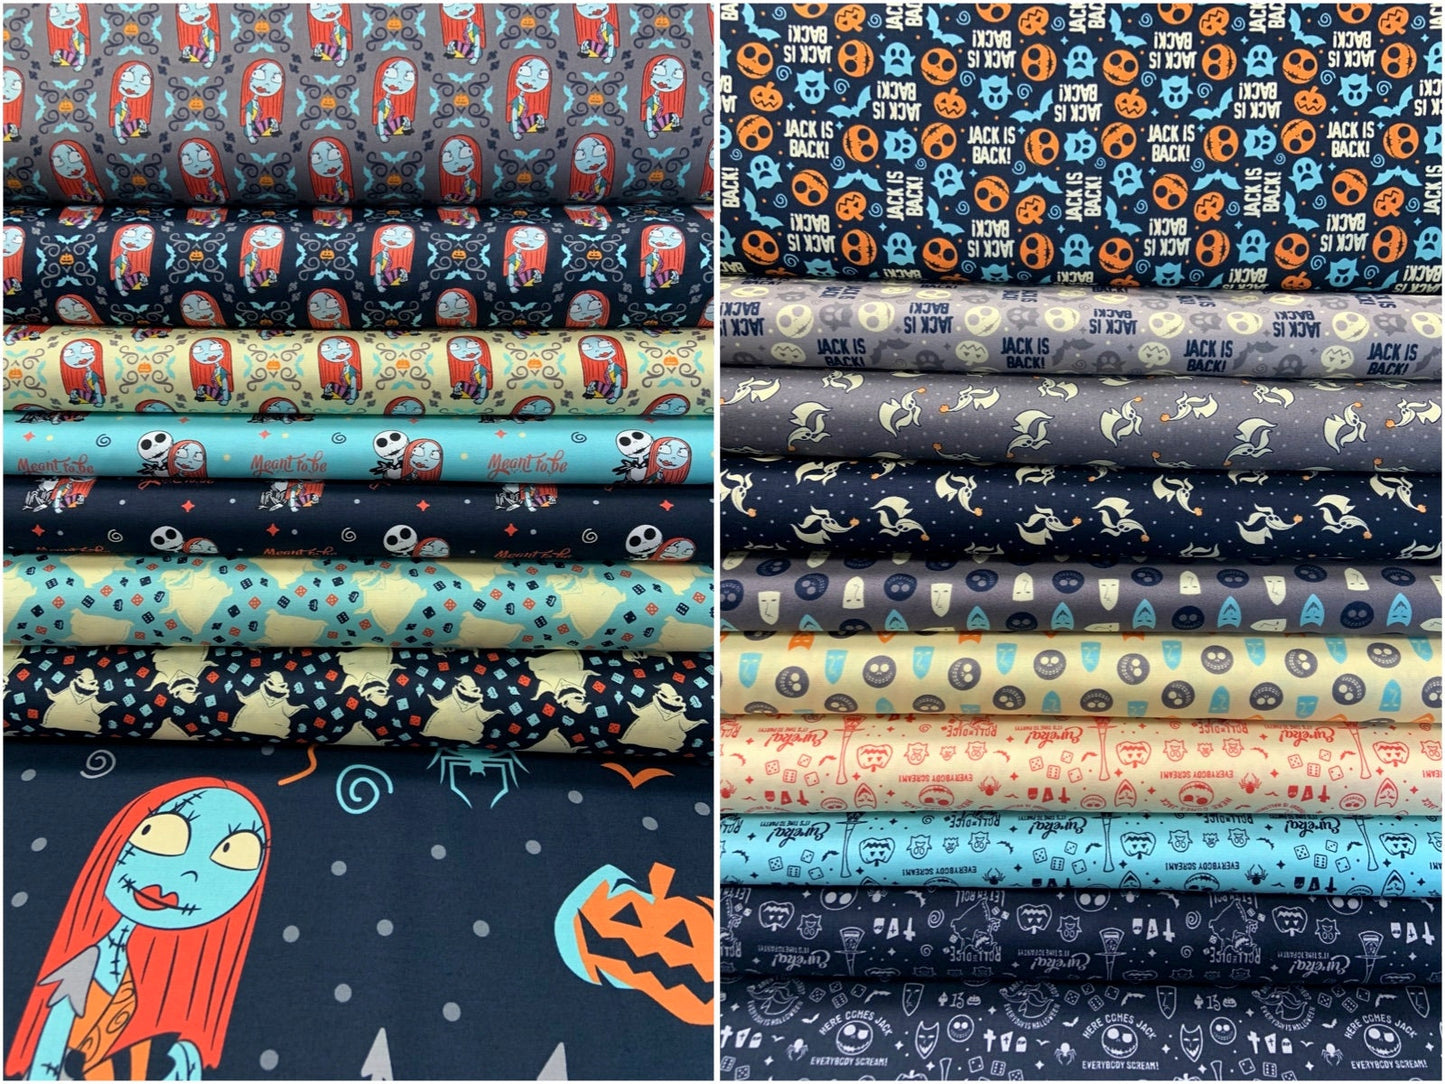 Master of Fright Nightmare Before Christmas Sally Grey 85390401-1 Licensed Cotton Woven Fabric